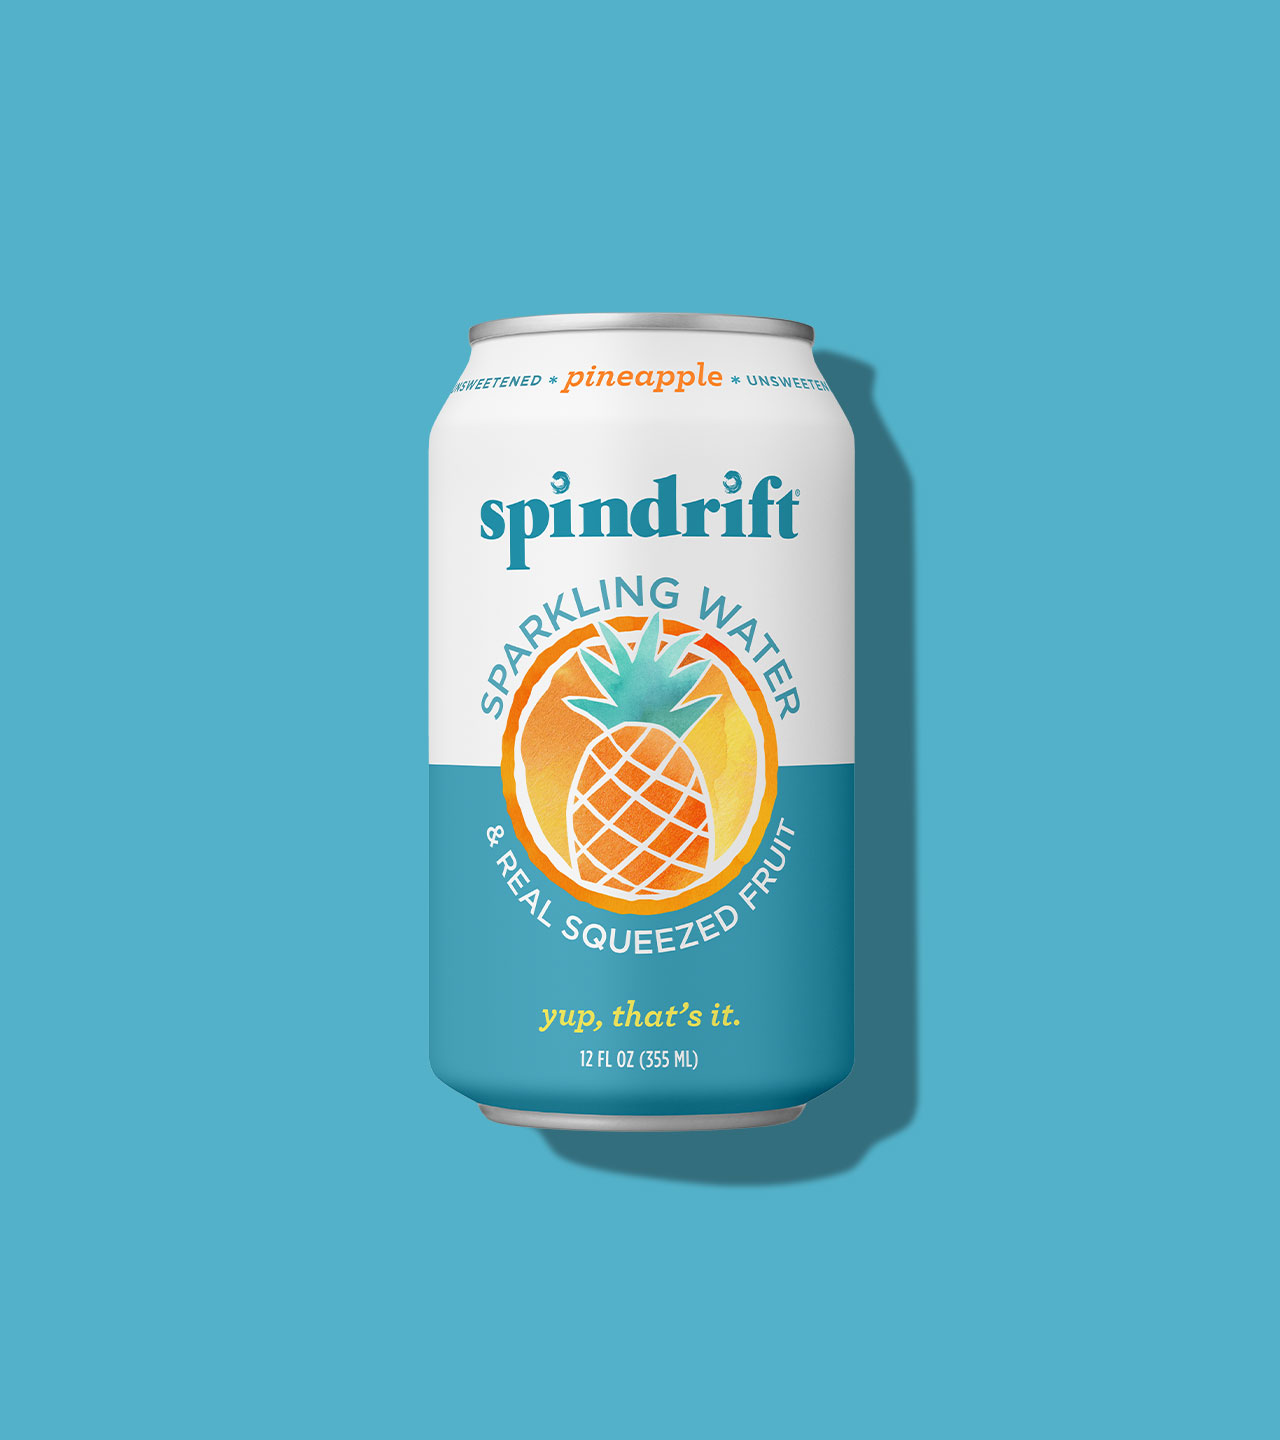 Spindrift Blood Orange Tangerine Packaging, Branding and Design by Colony